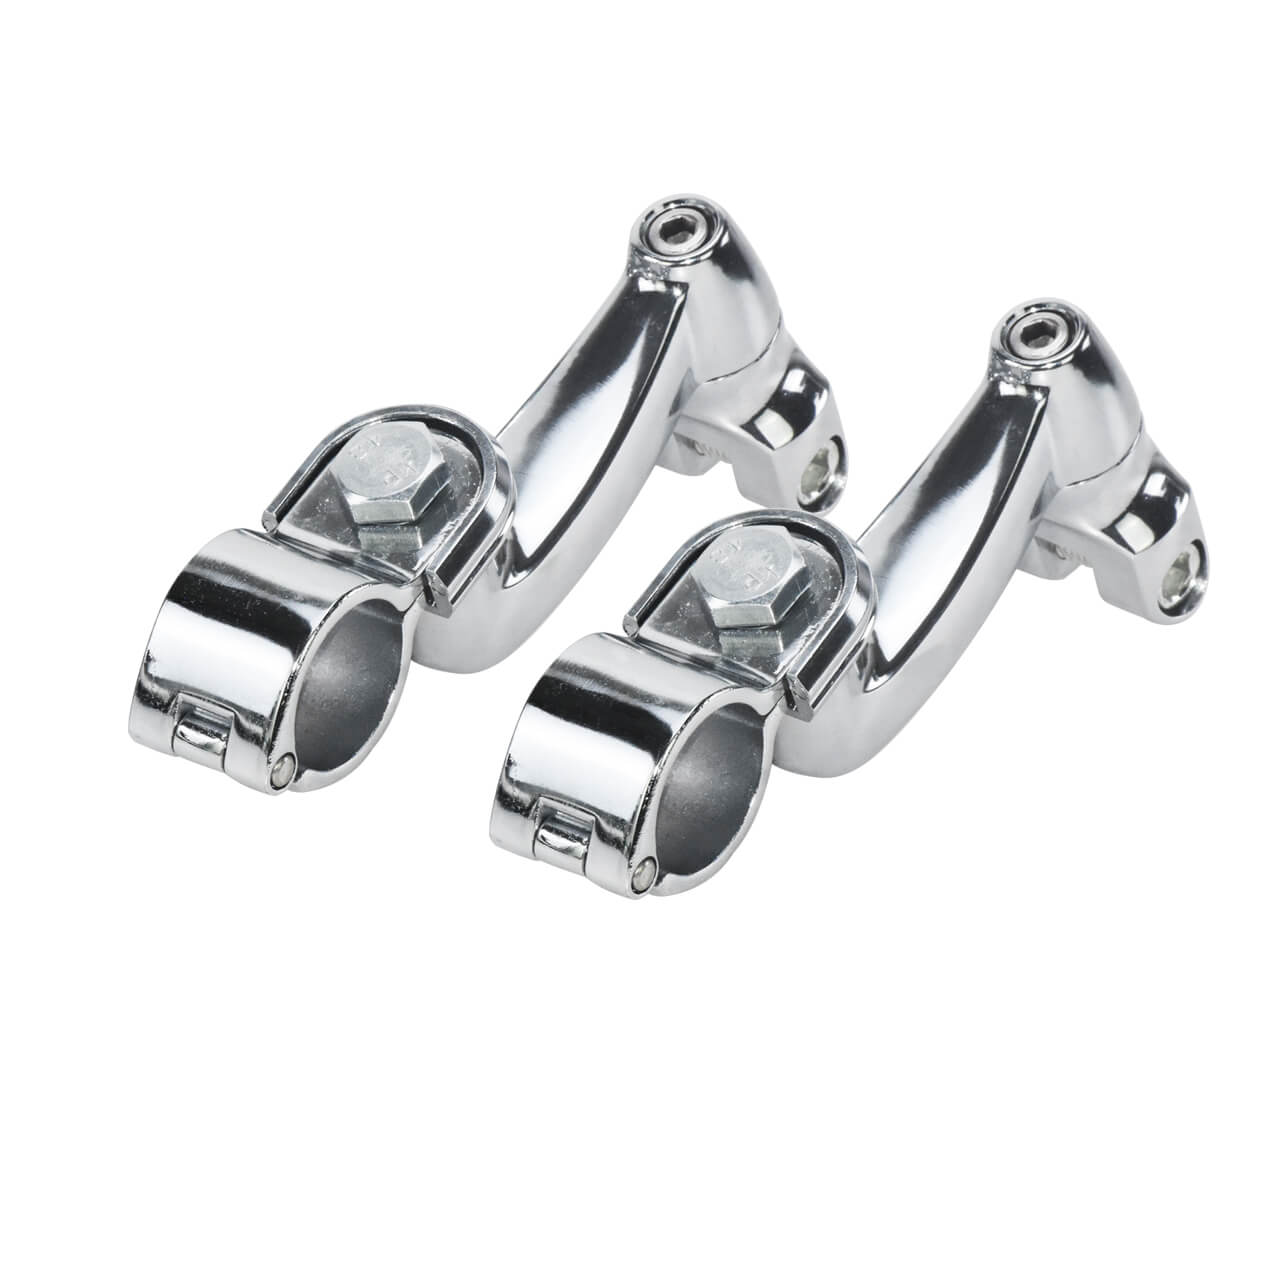 PE009701-mactions-Adjustable-1.25in-Highway-Foot-Peg-Mounting-chrome